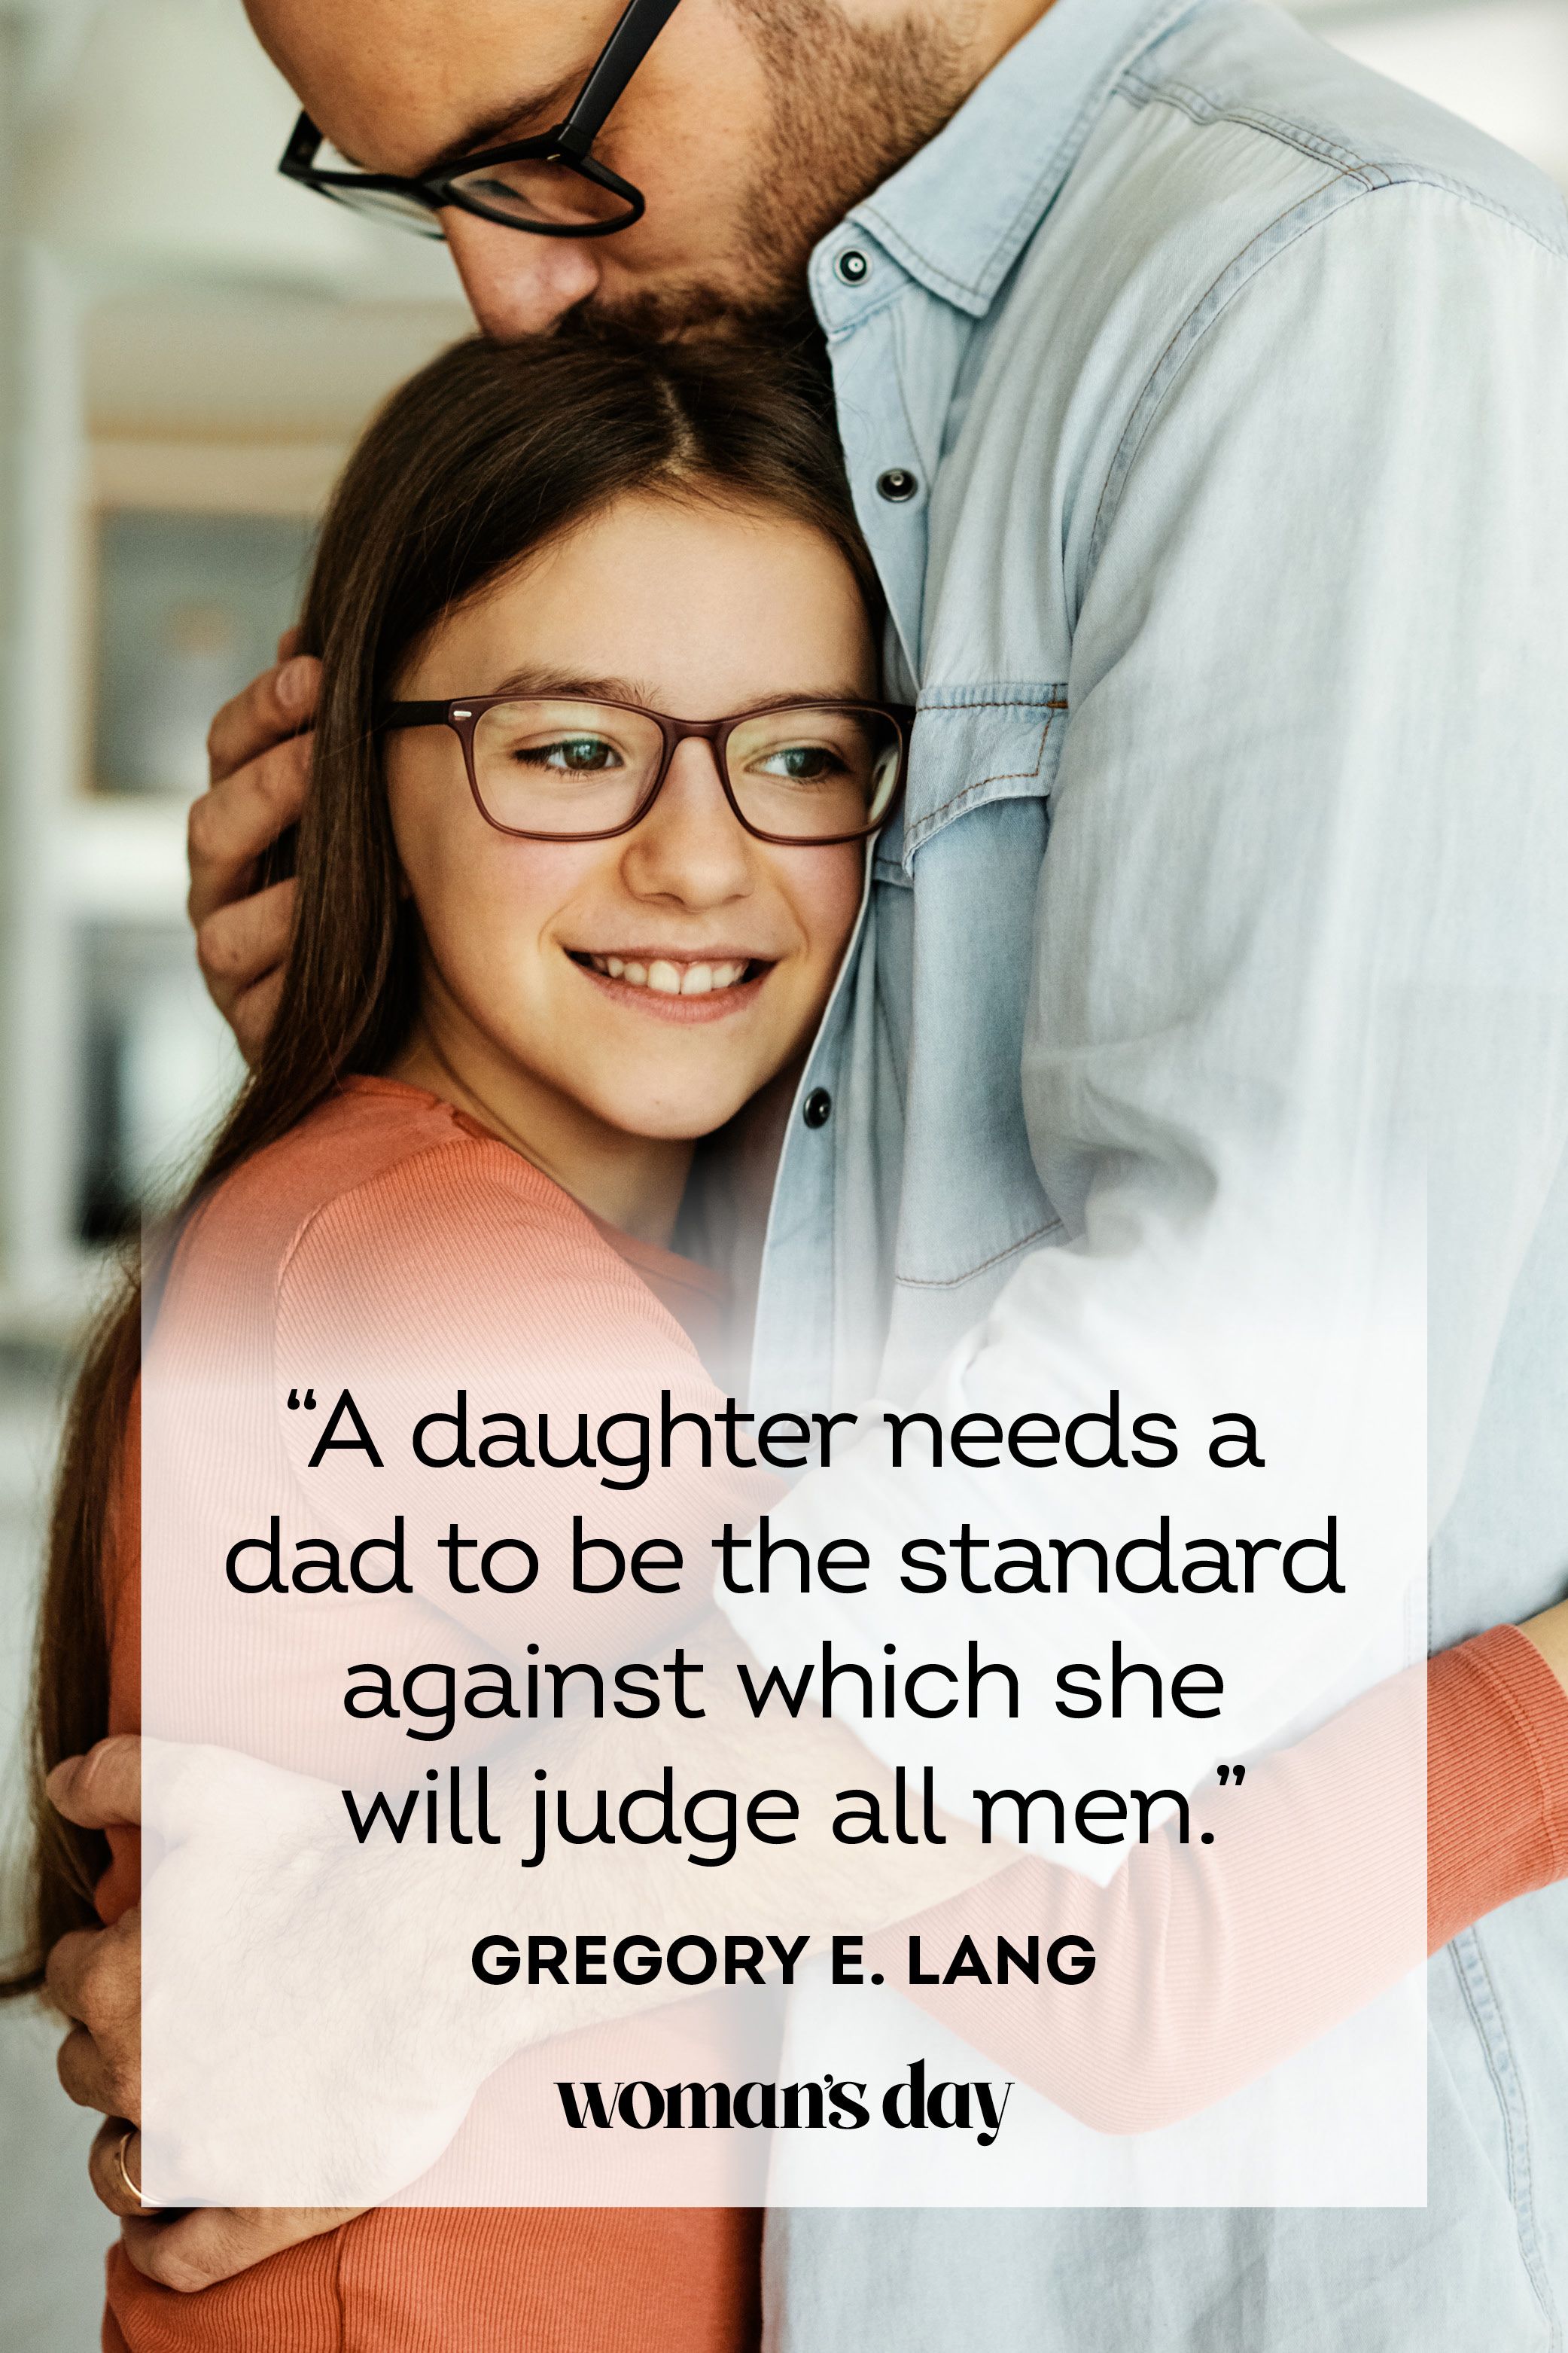 dear dad quotes from daughter